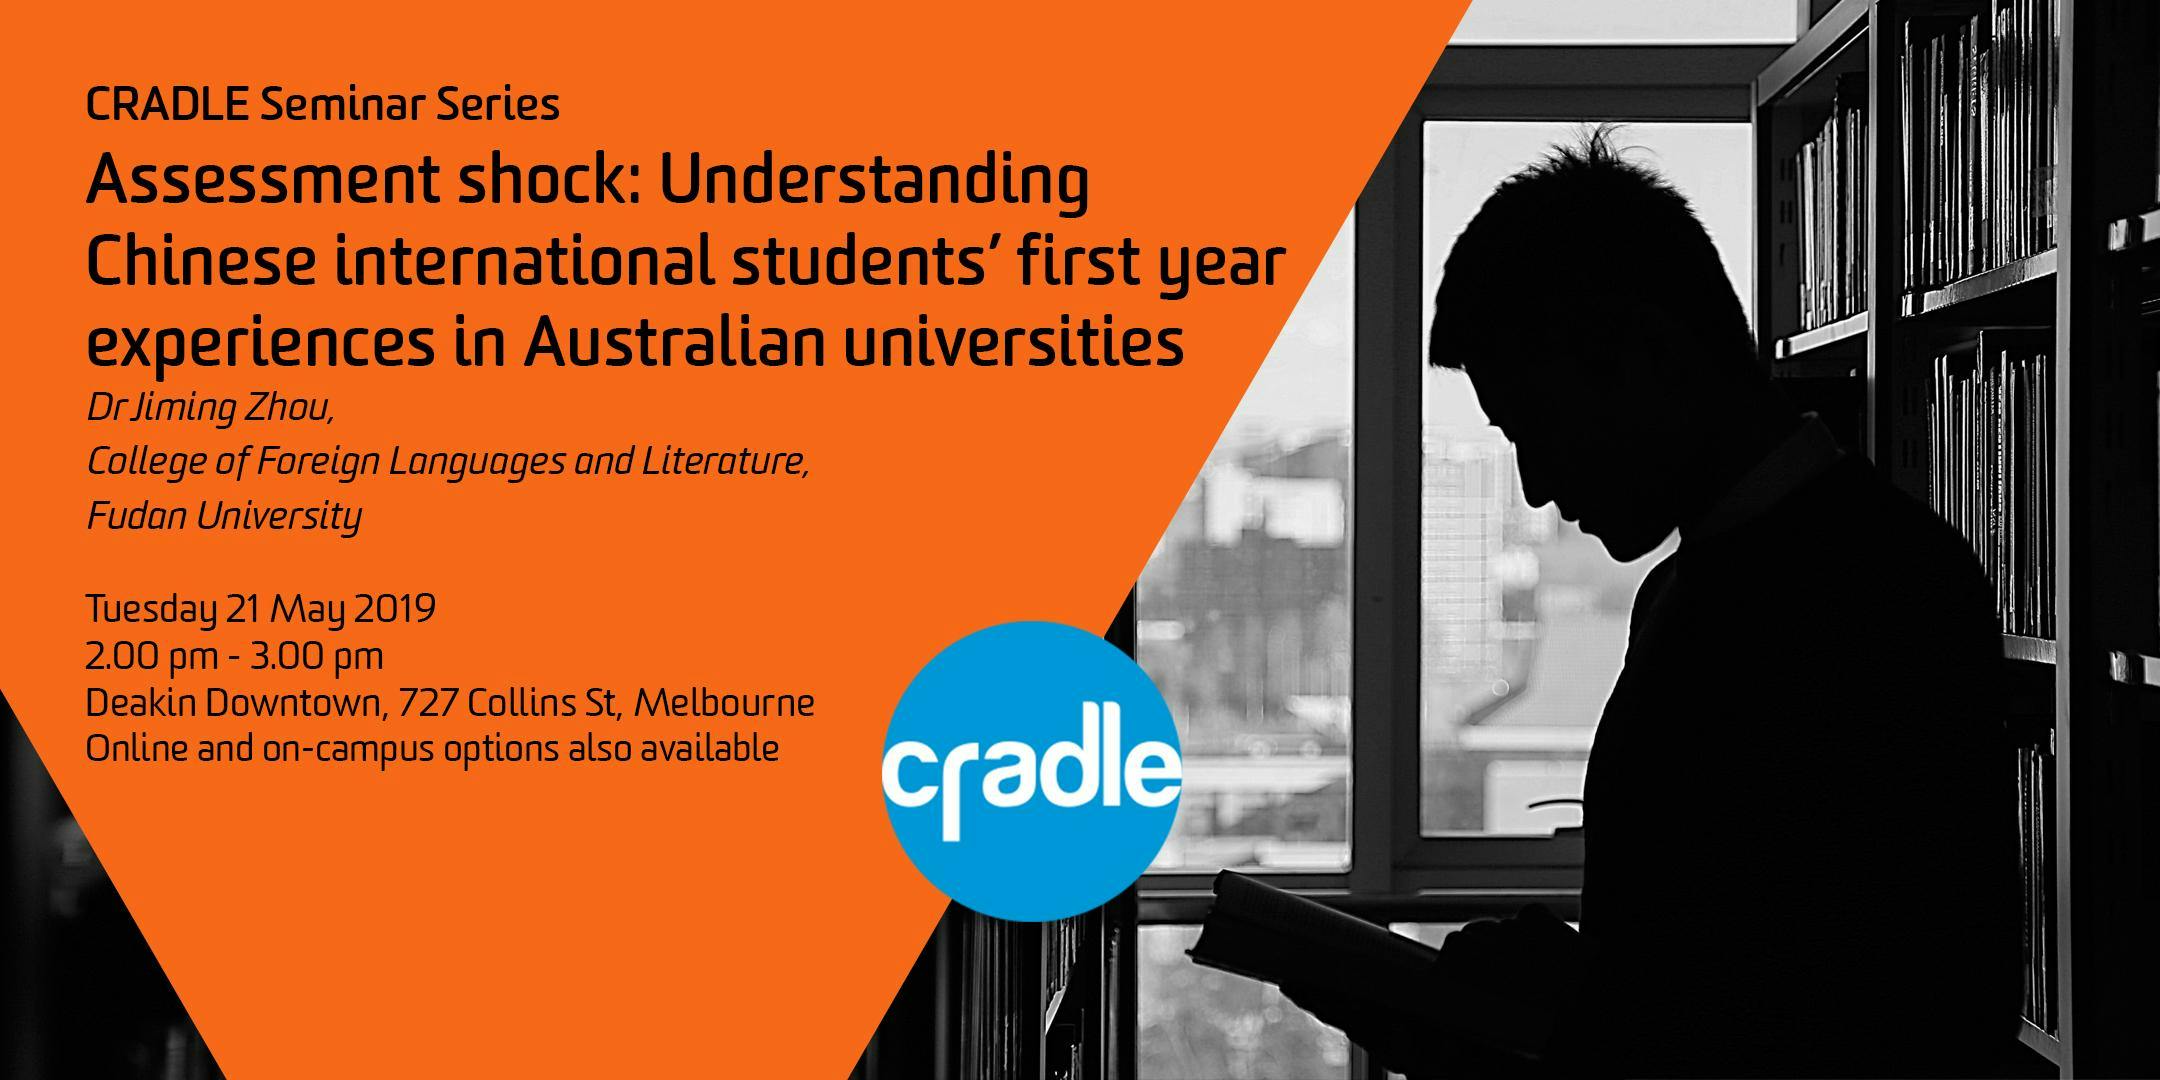 CRADLE Seminar Series: Jiming Zhou on Chinese Students' First Year Experiences in Australian Universities